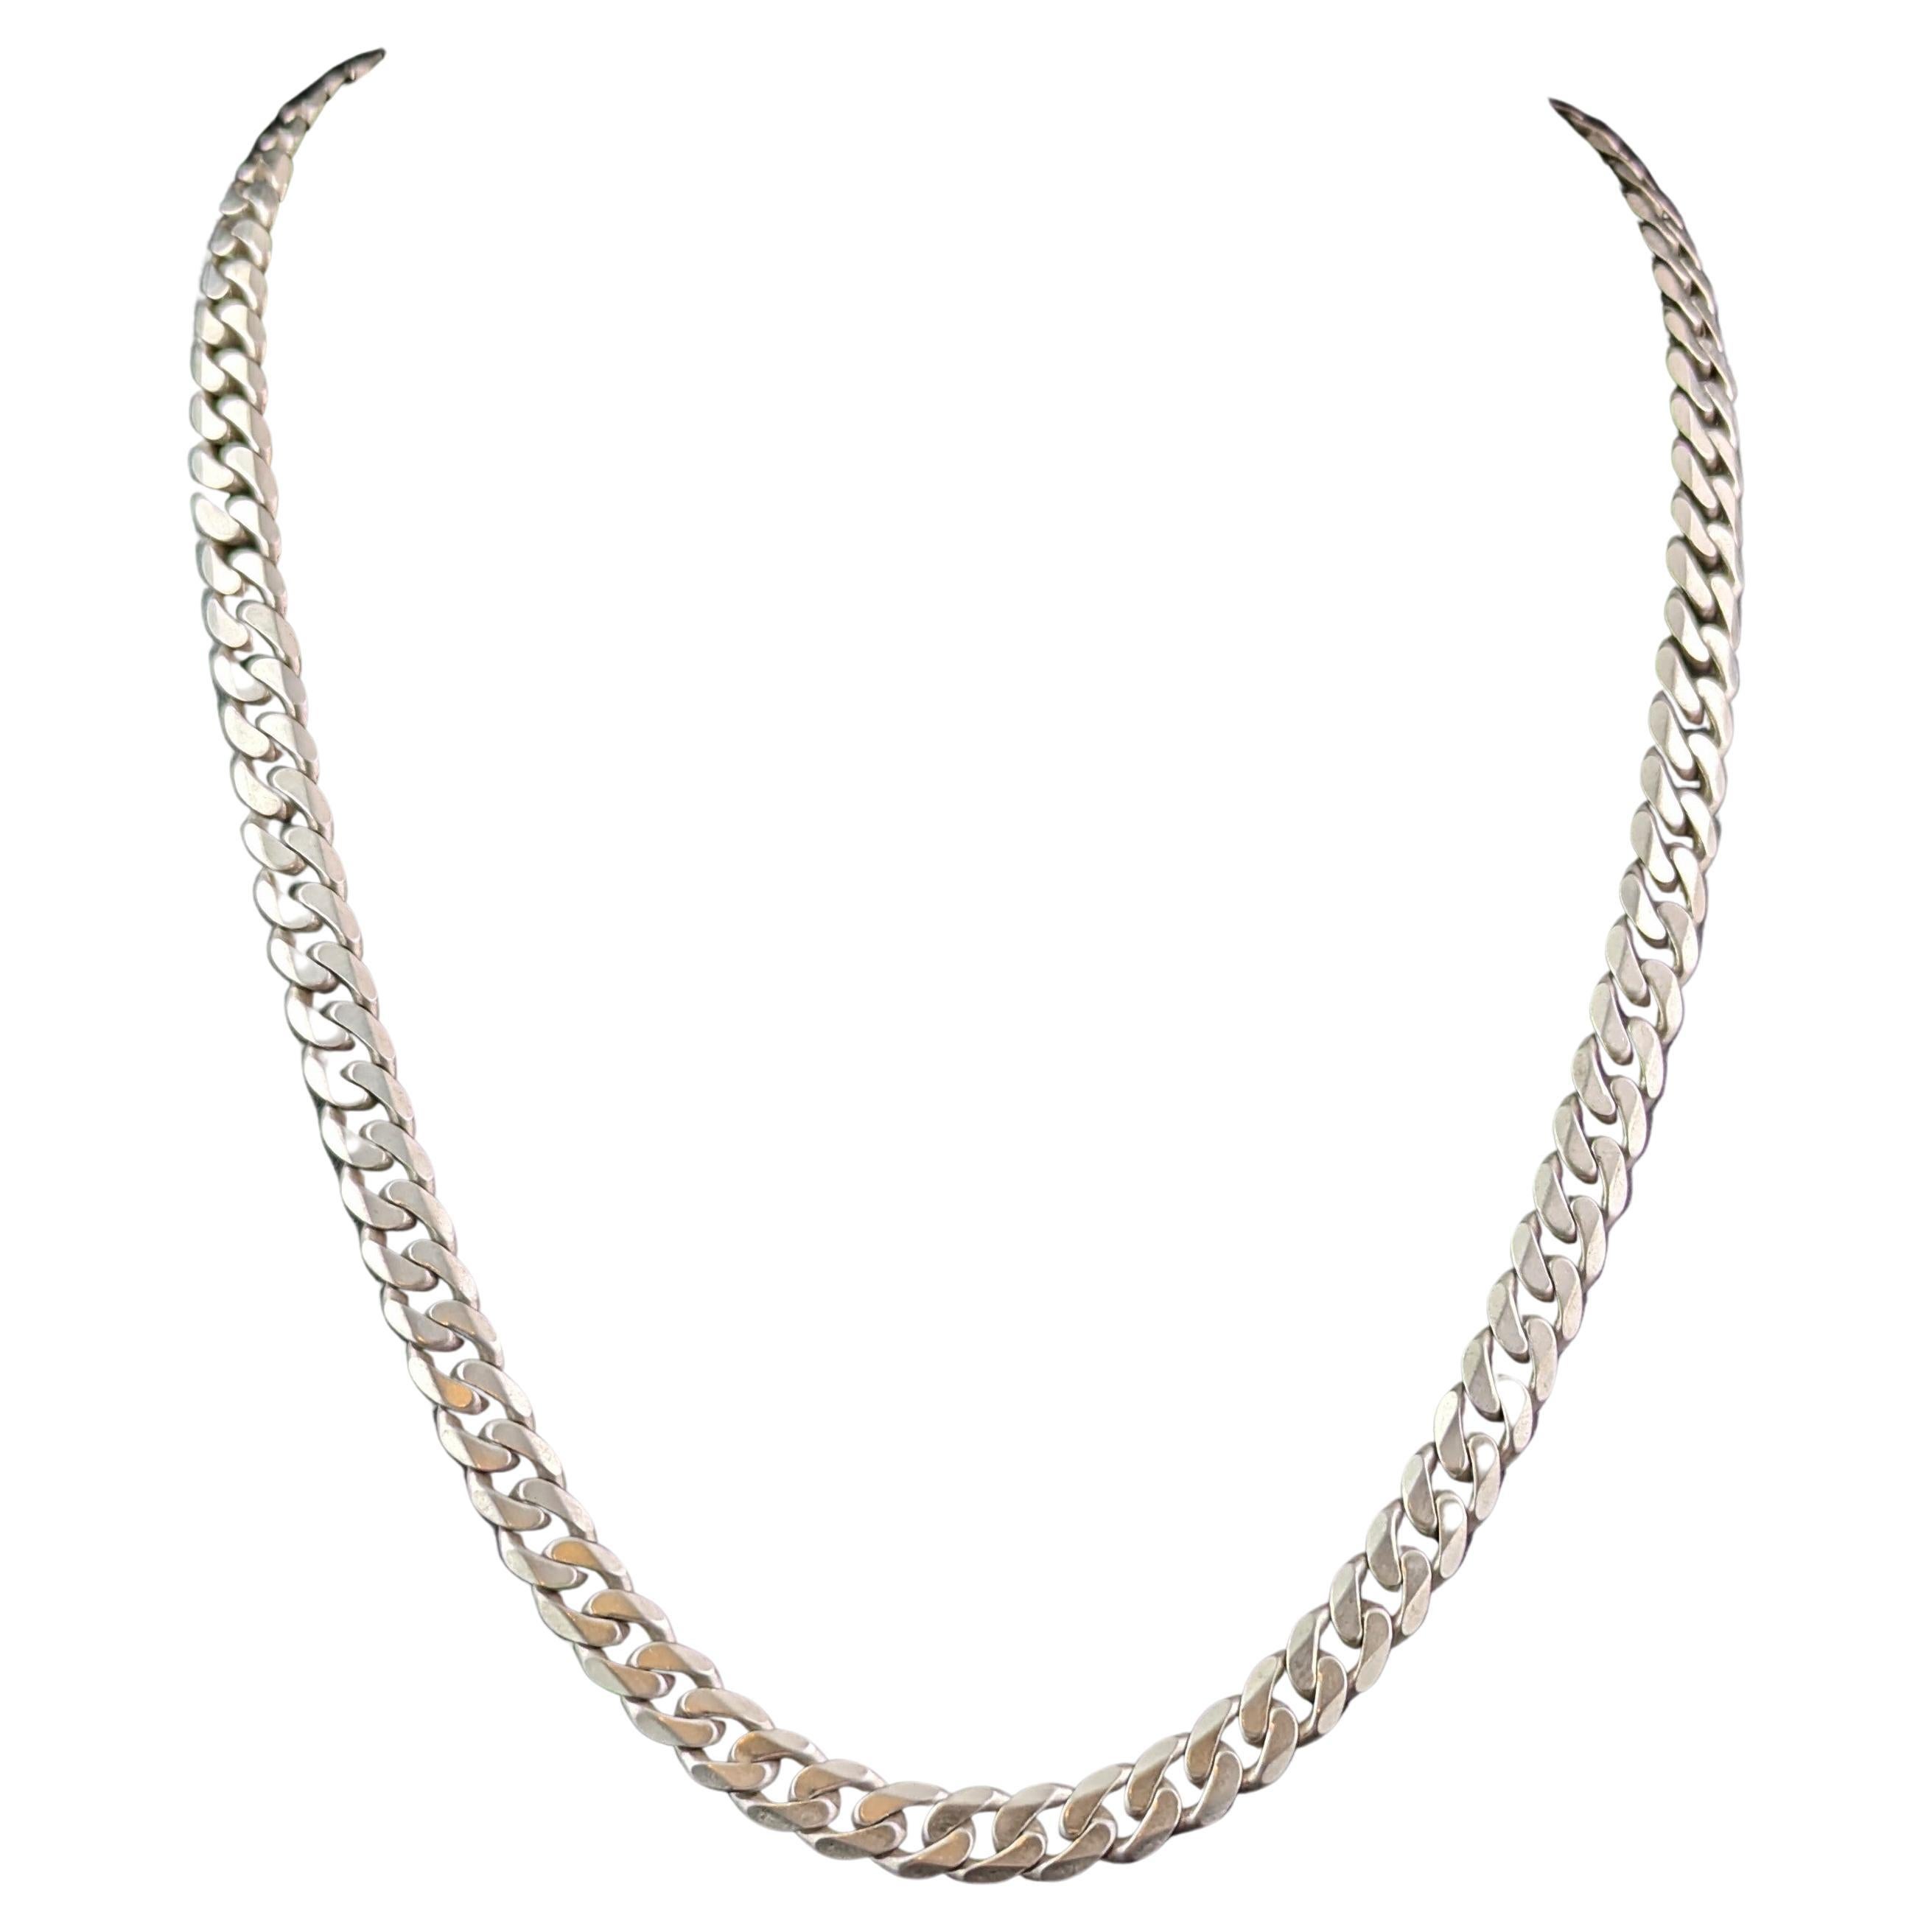 Vintage sterling silver curb link chain necklace 